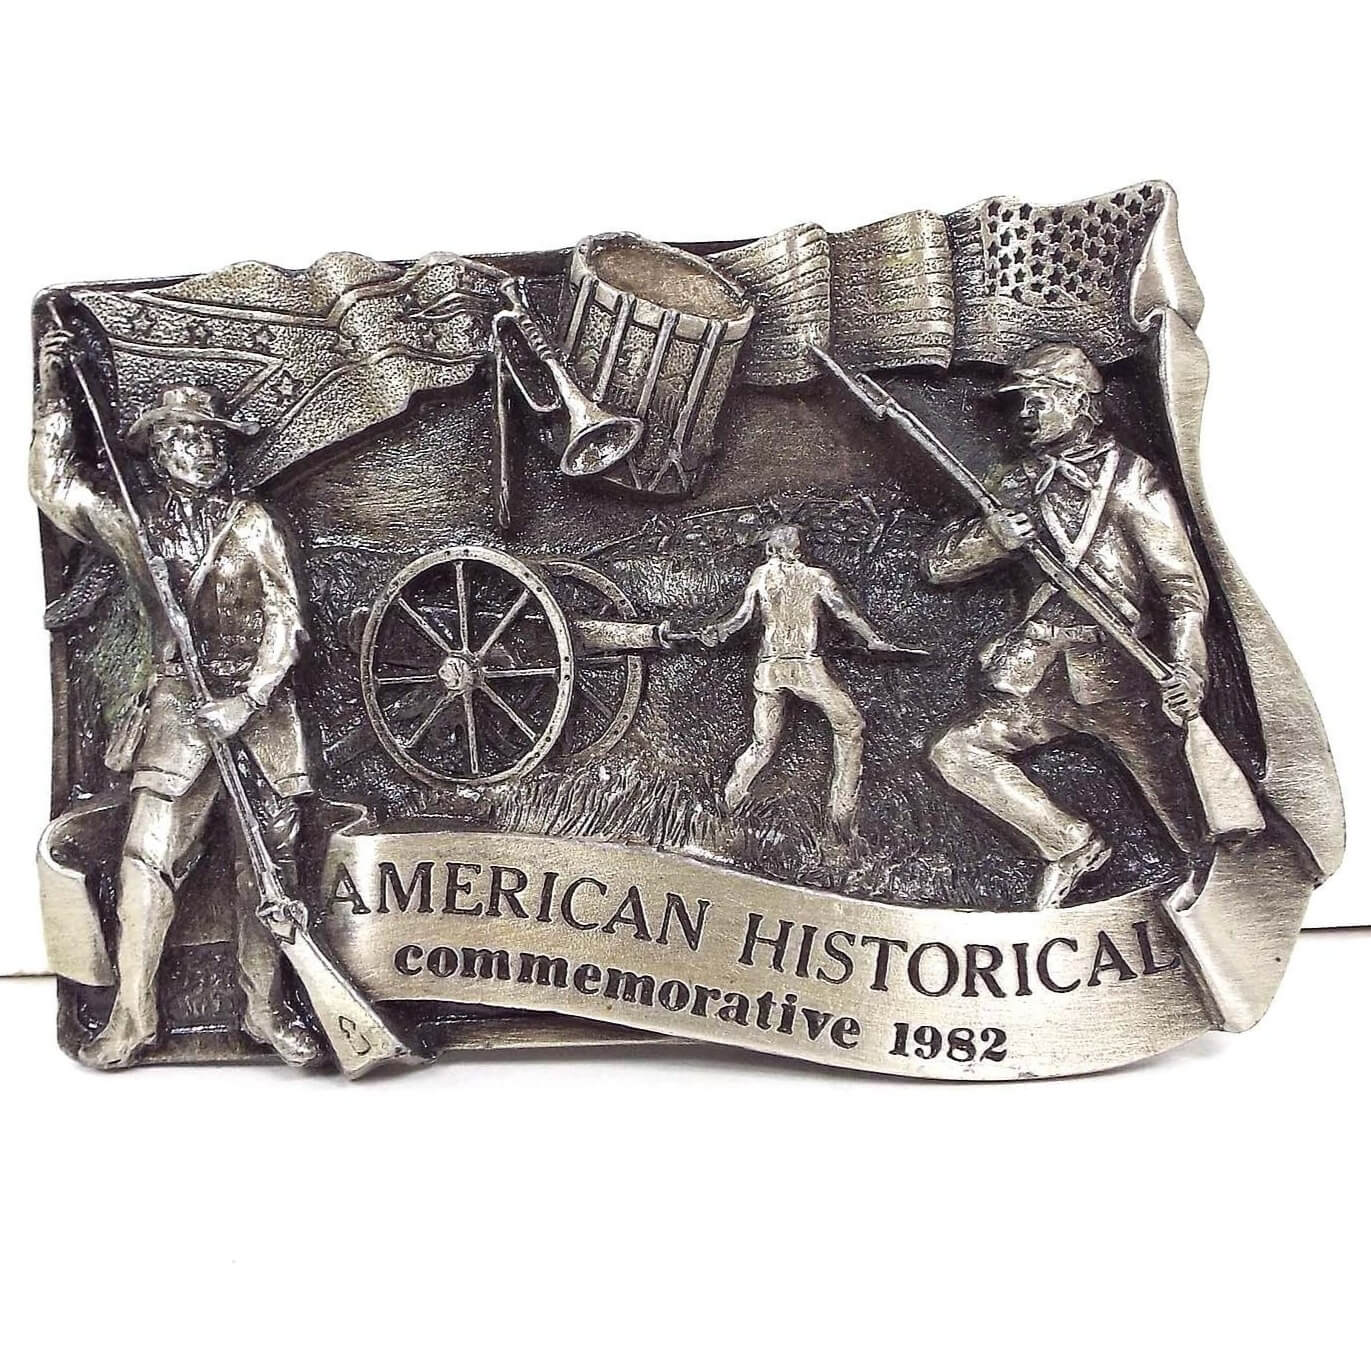 Front view of the retro vintage Siskiyou American Historical Commemorative belt buckle. It shows a soldier from each side of the civil war as well as someone loading a cannon in the middle. It's marked 1982 on the front.